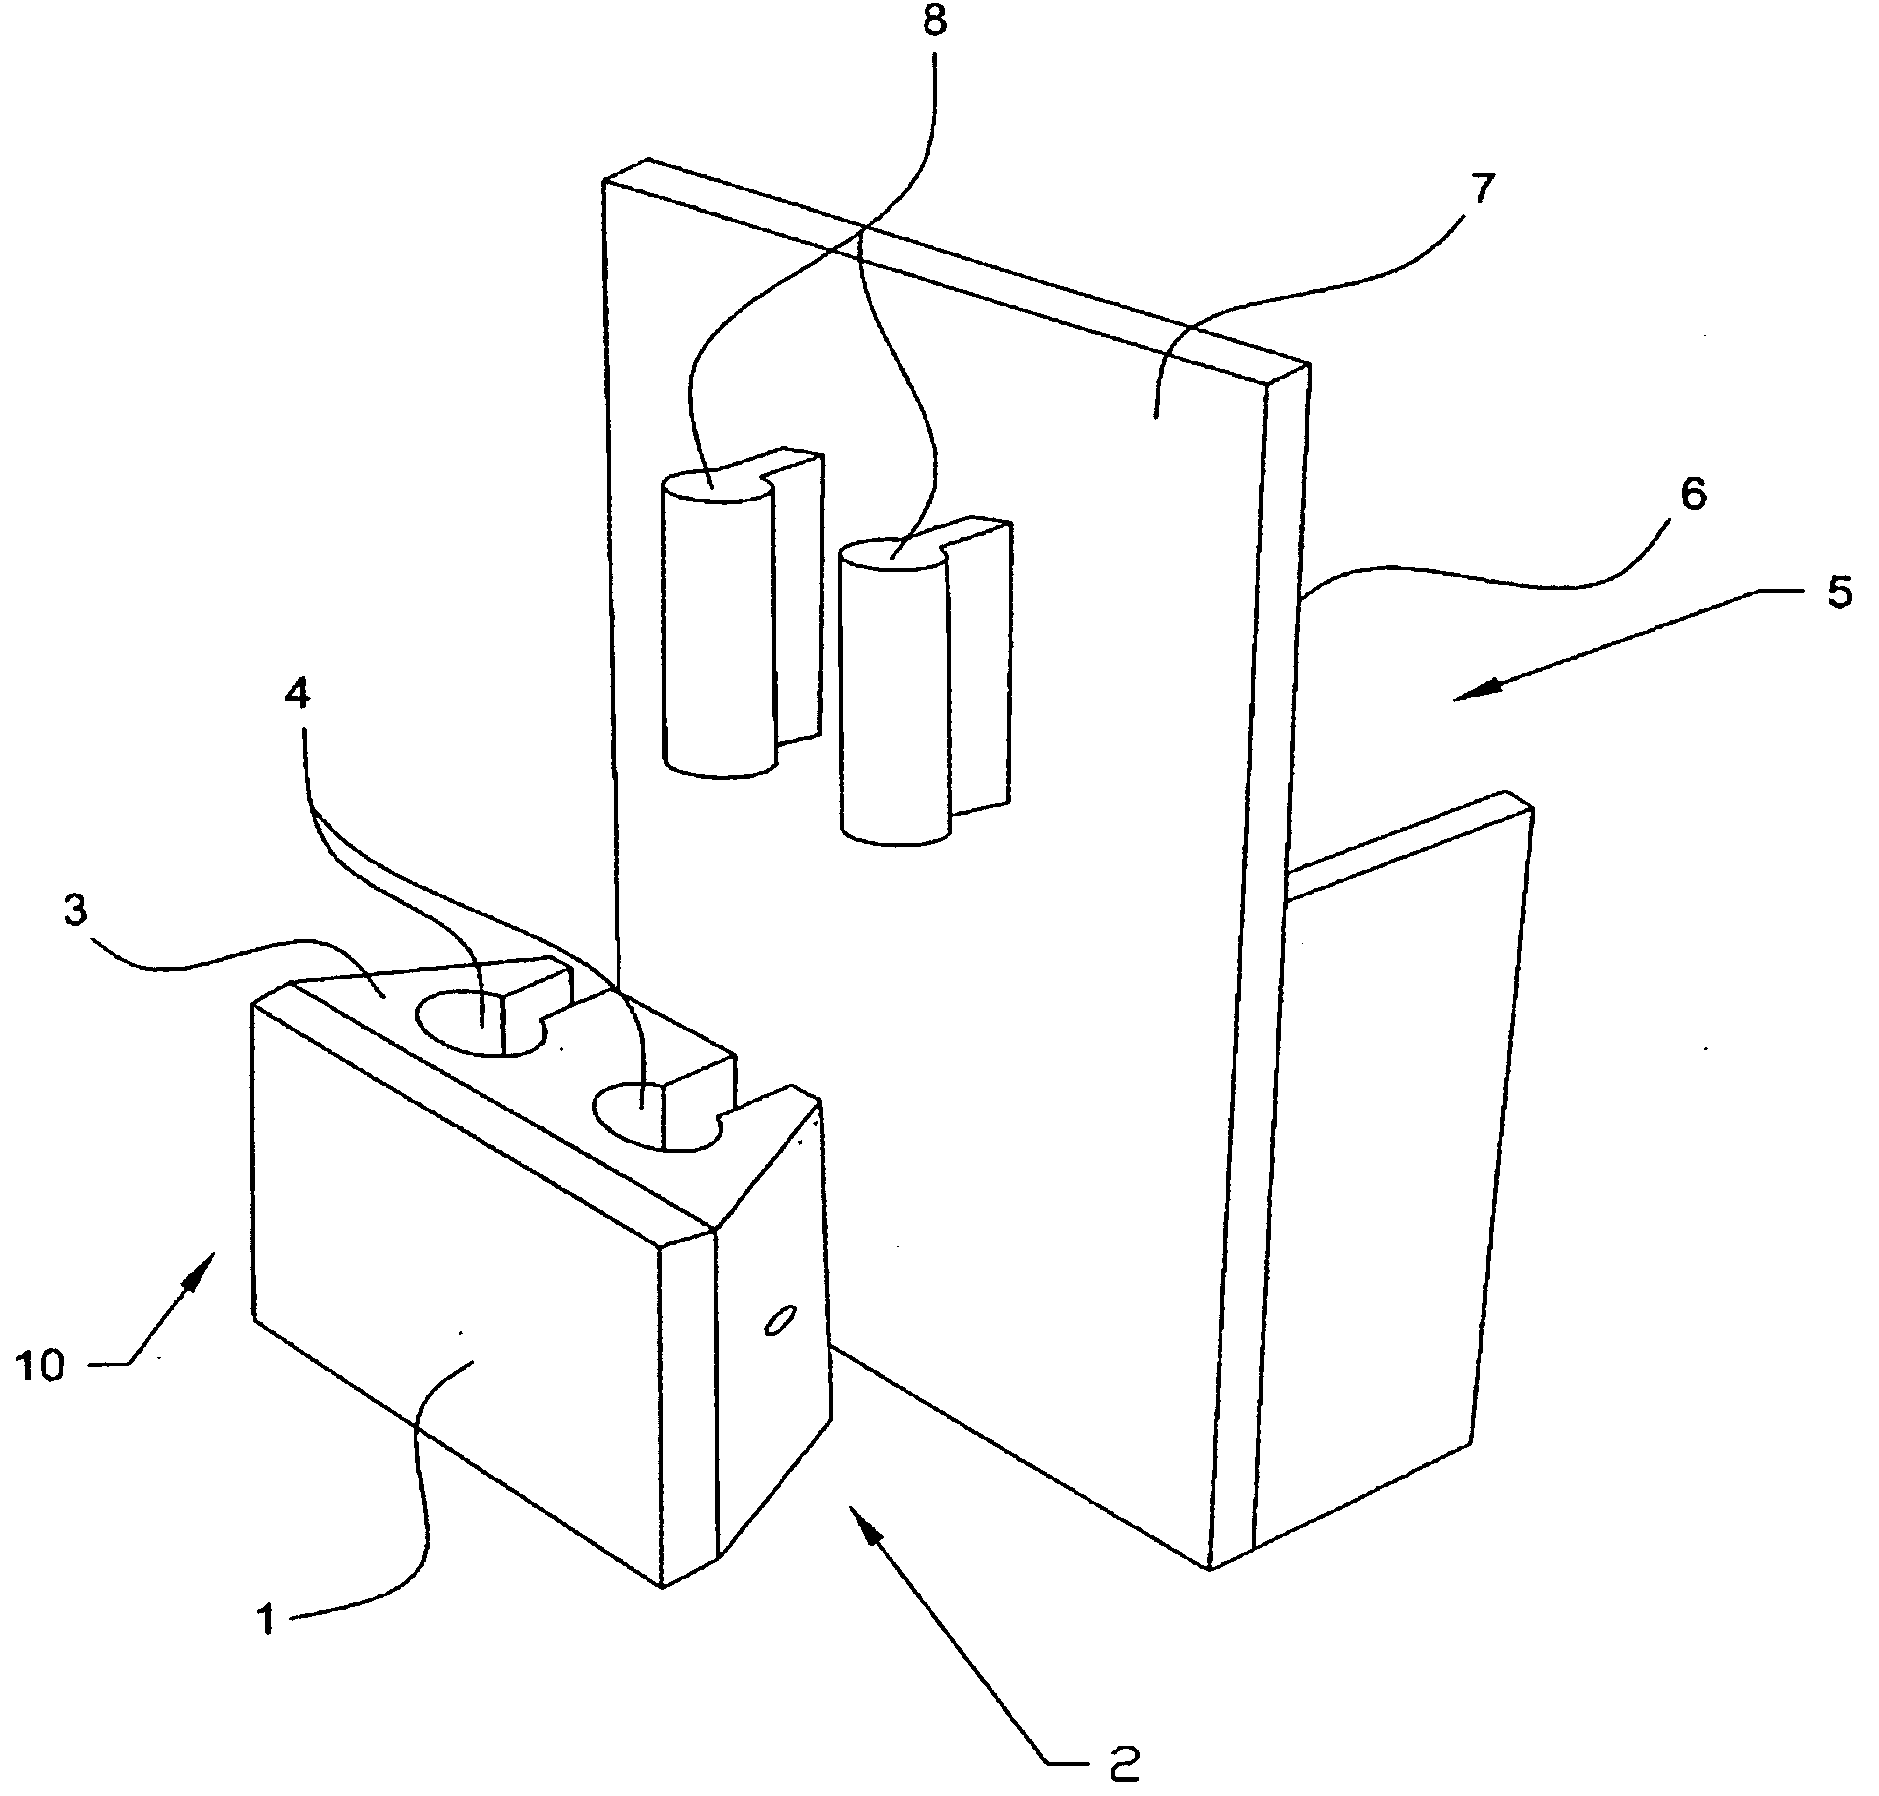 Universal Feature Attachment System